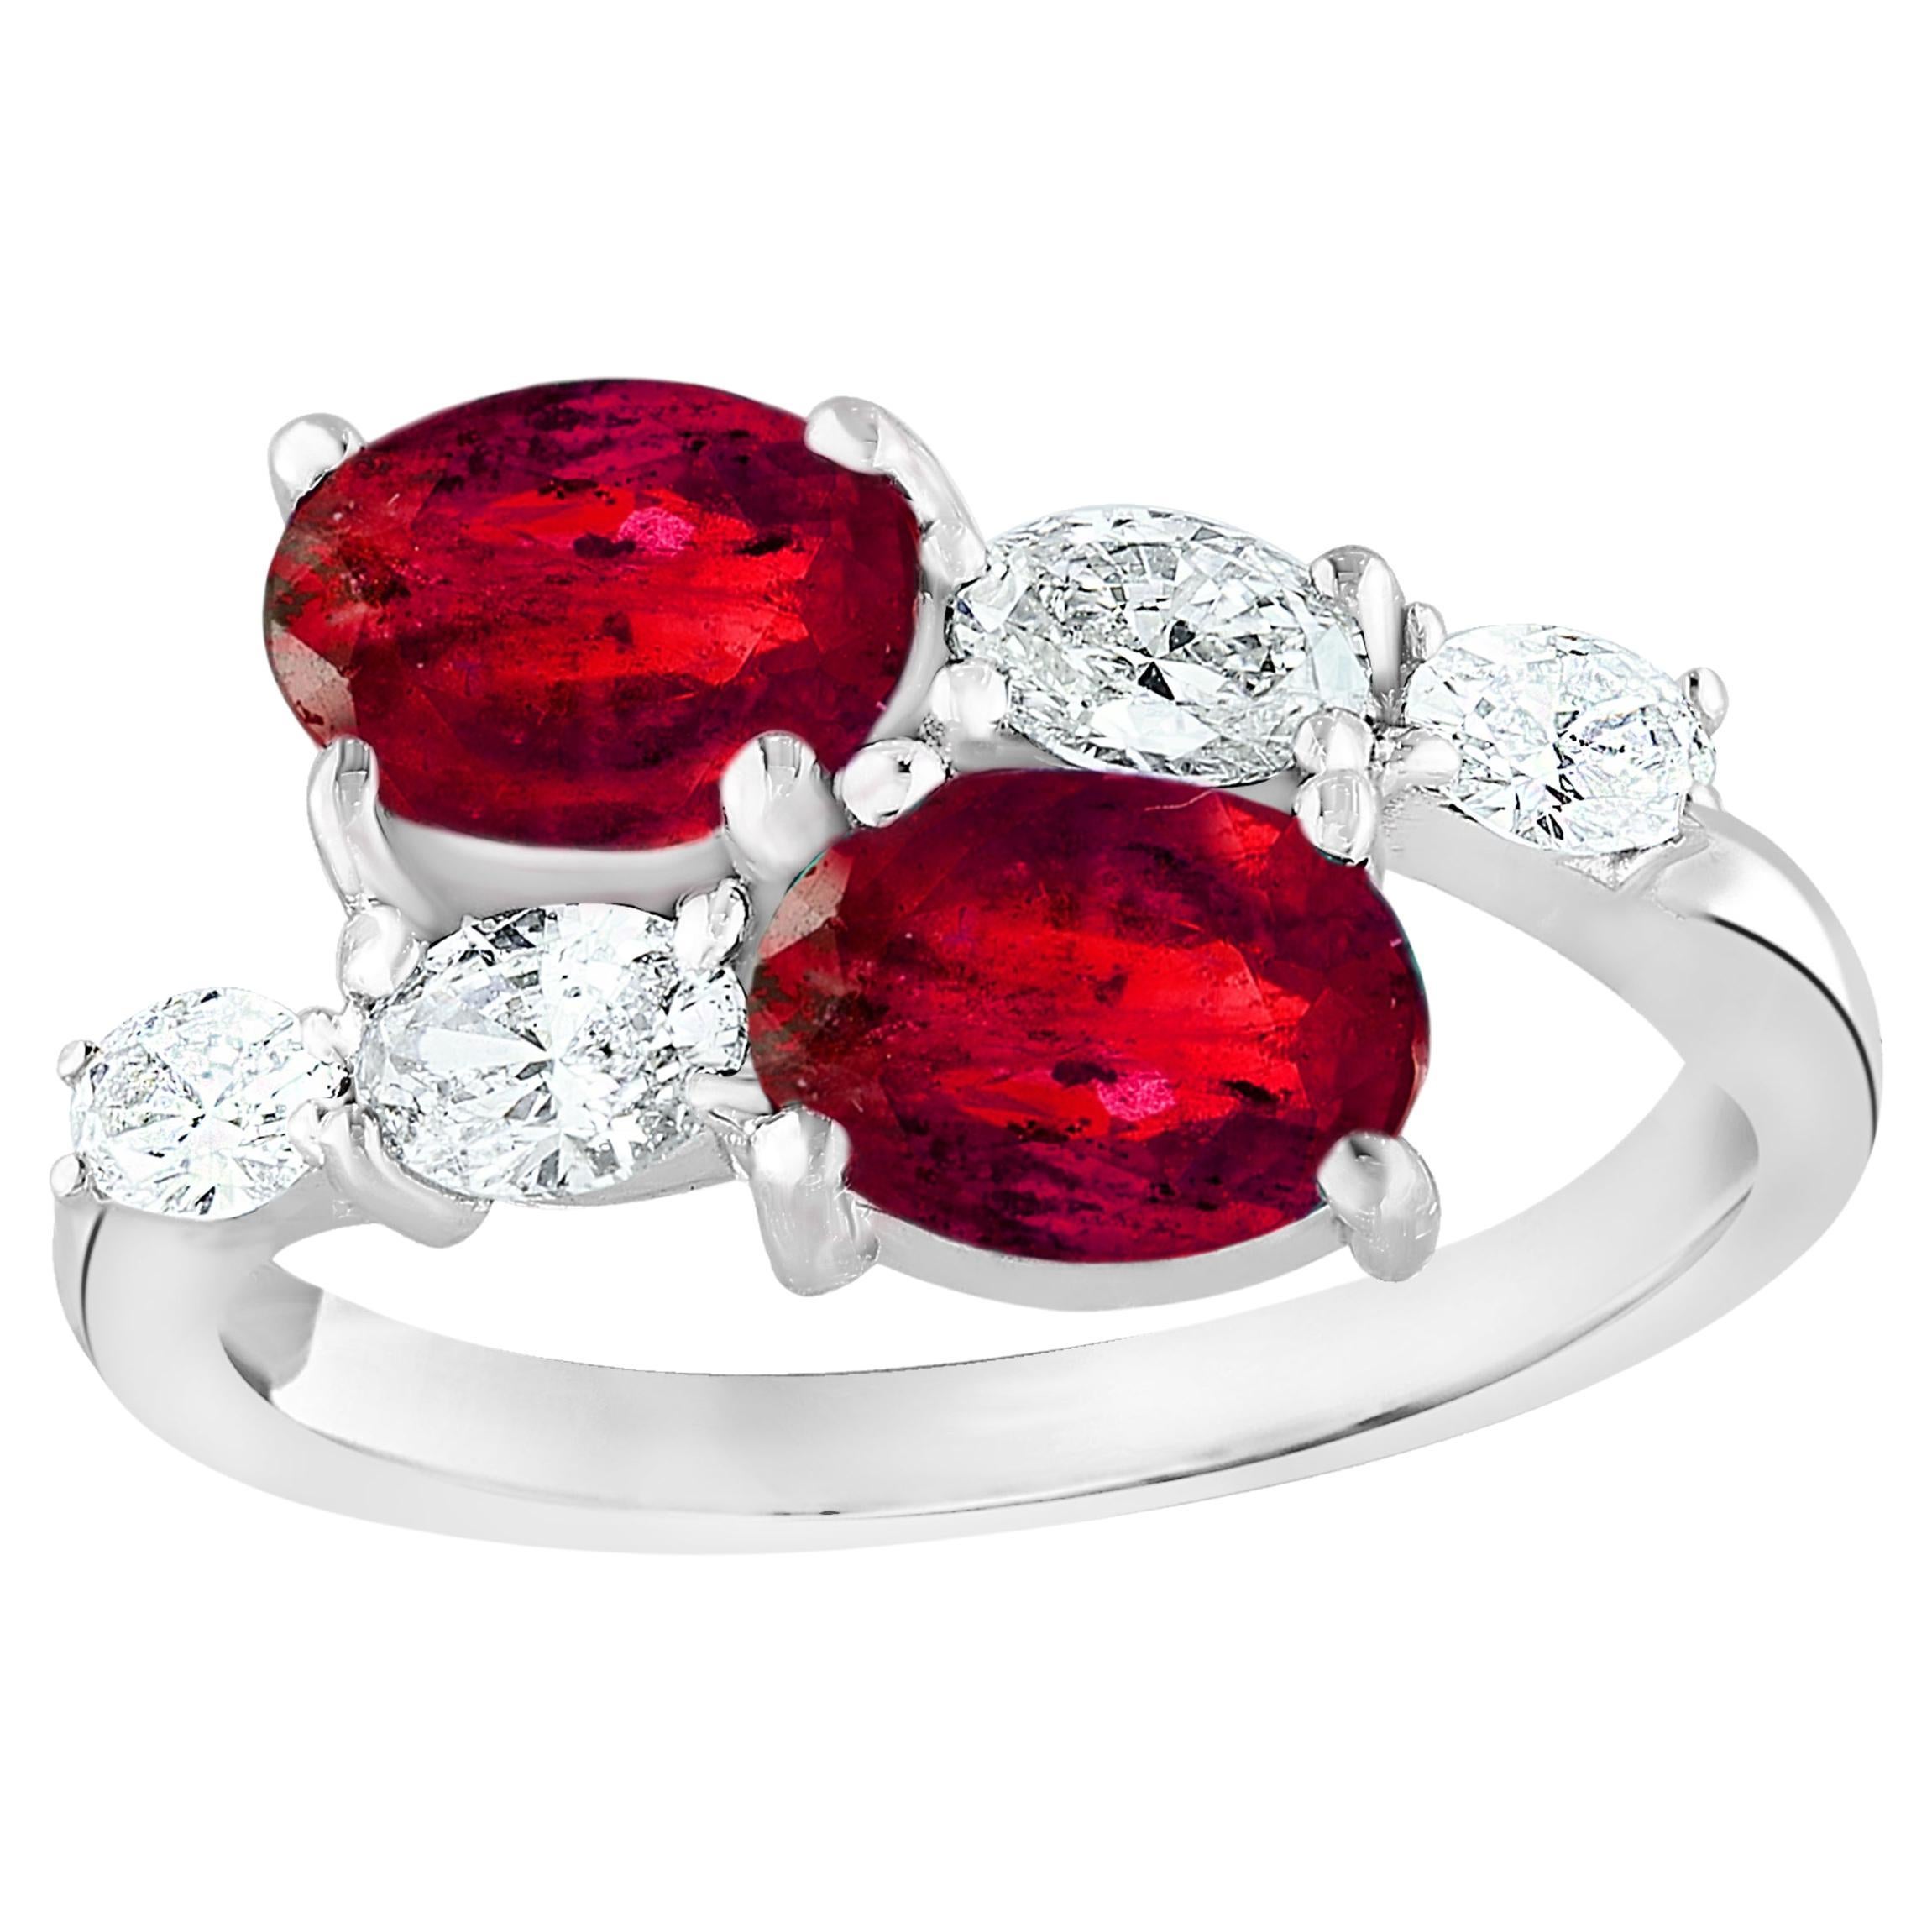 1.54 Carat Oval Cut Ruby Diamond Toi Et Moi Engagement Ring in 14K White Gold For Sale